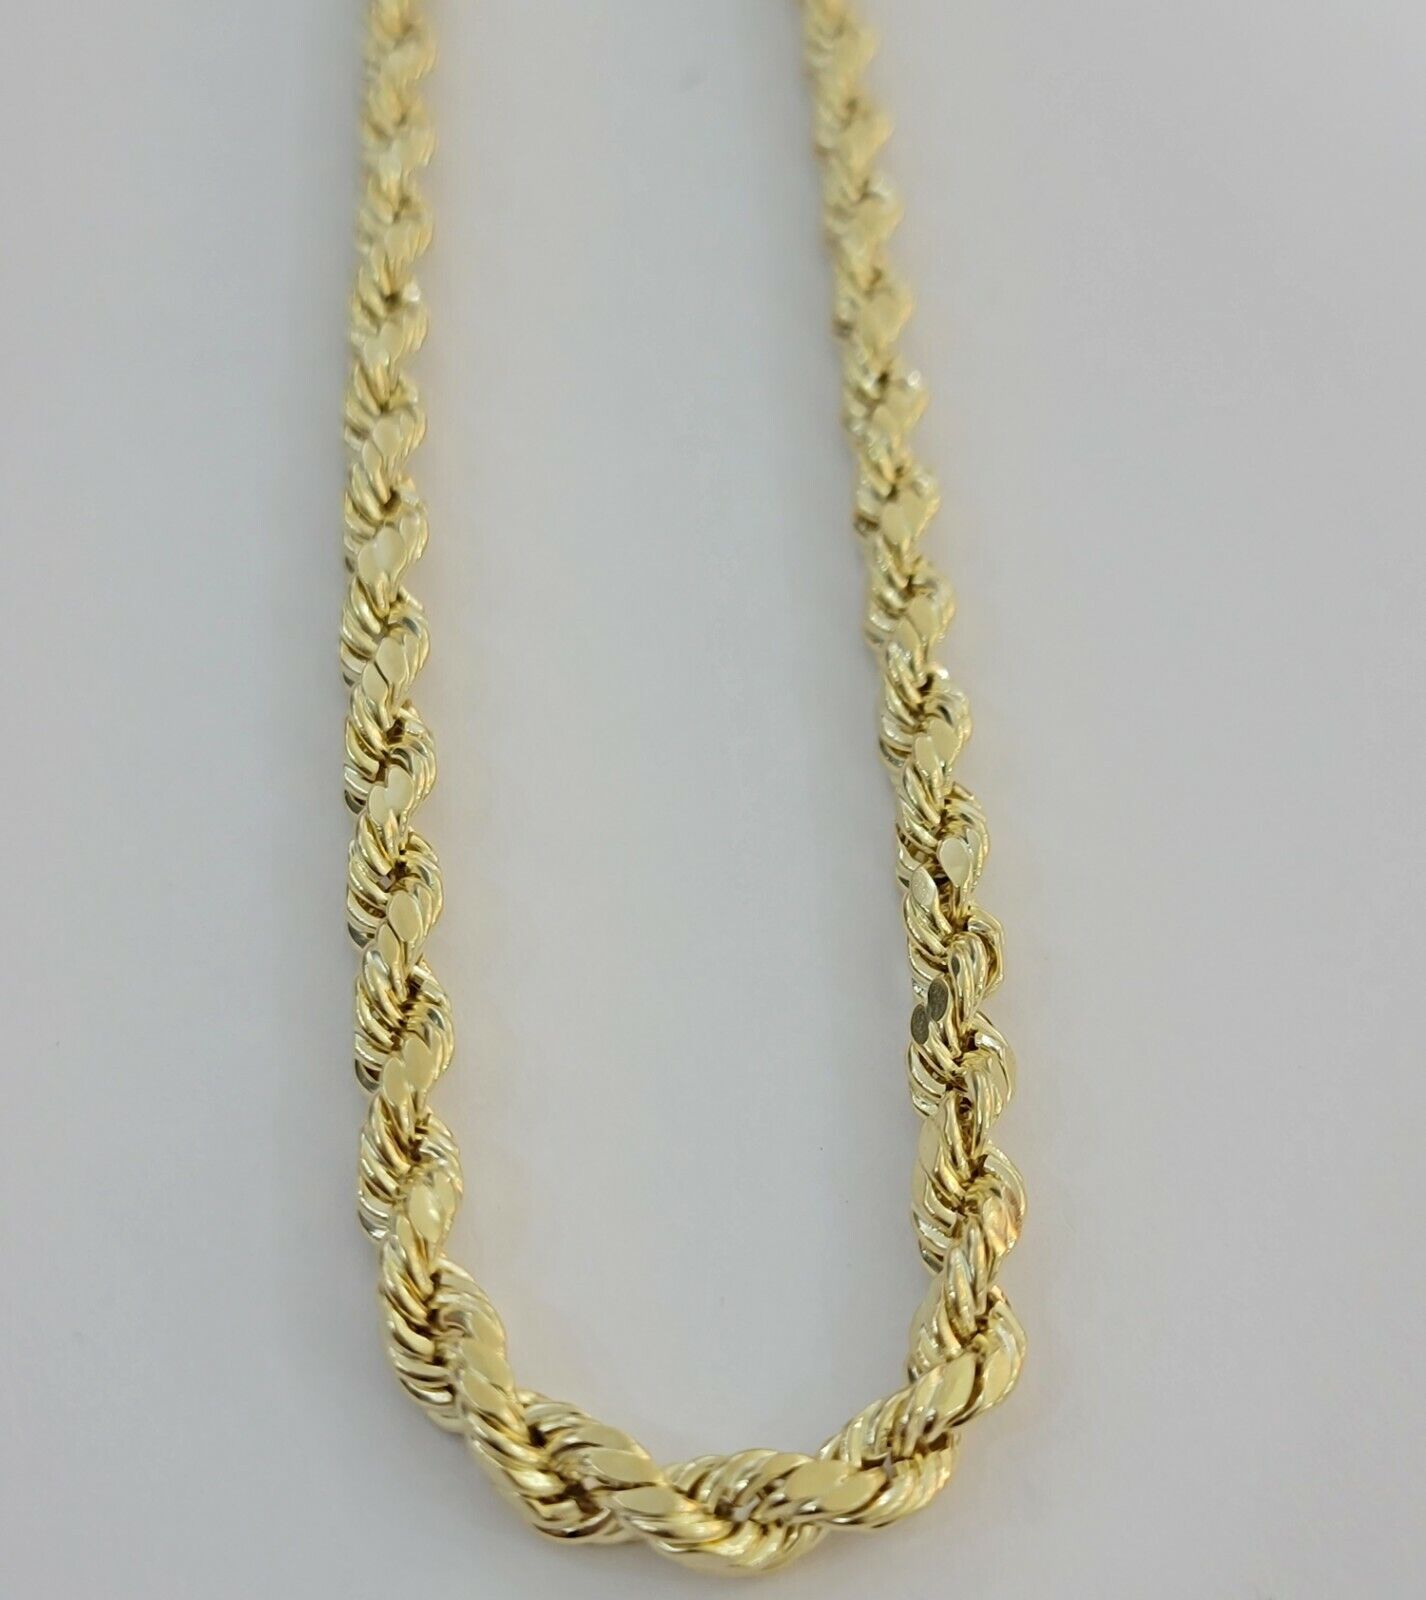 Real Solid 10K Rope Necklace 6mm Chain 18-30 inch 10kt Yellow Gold Diamond Cut 24 inch